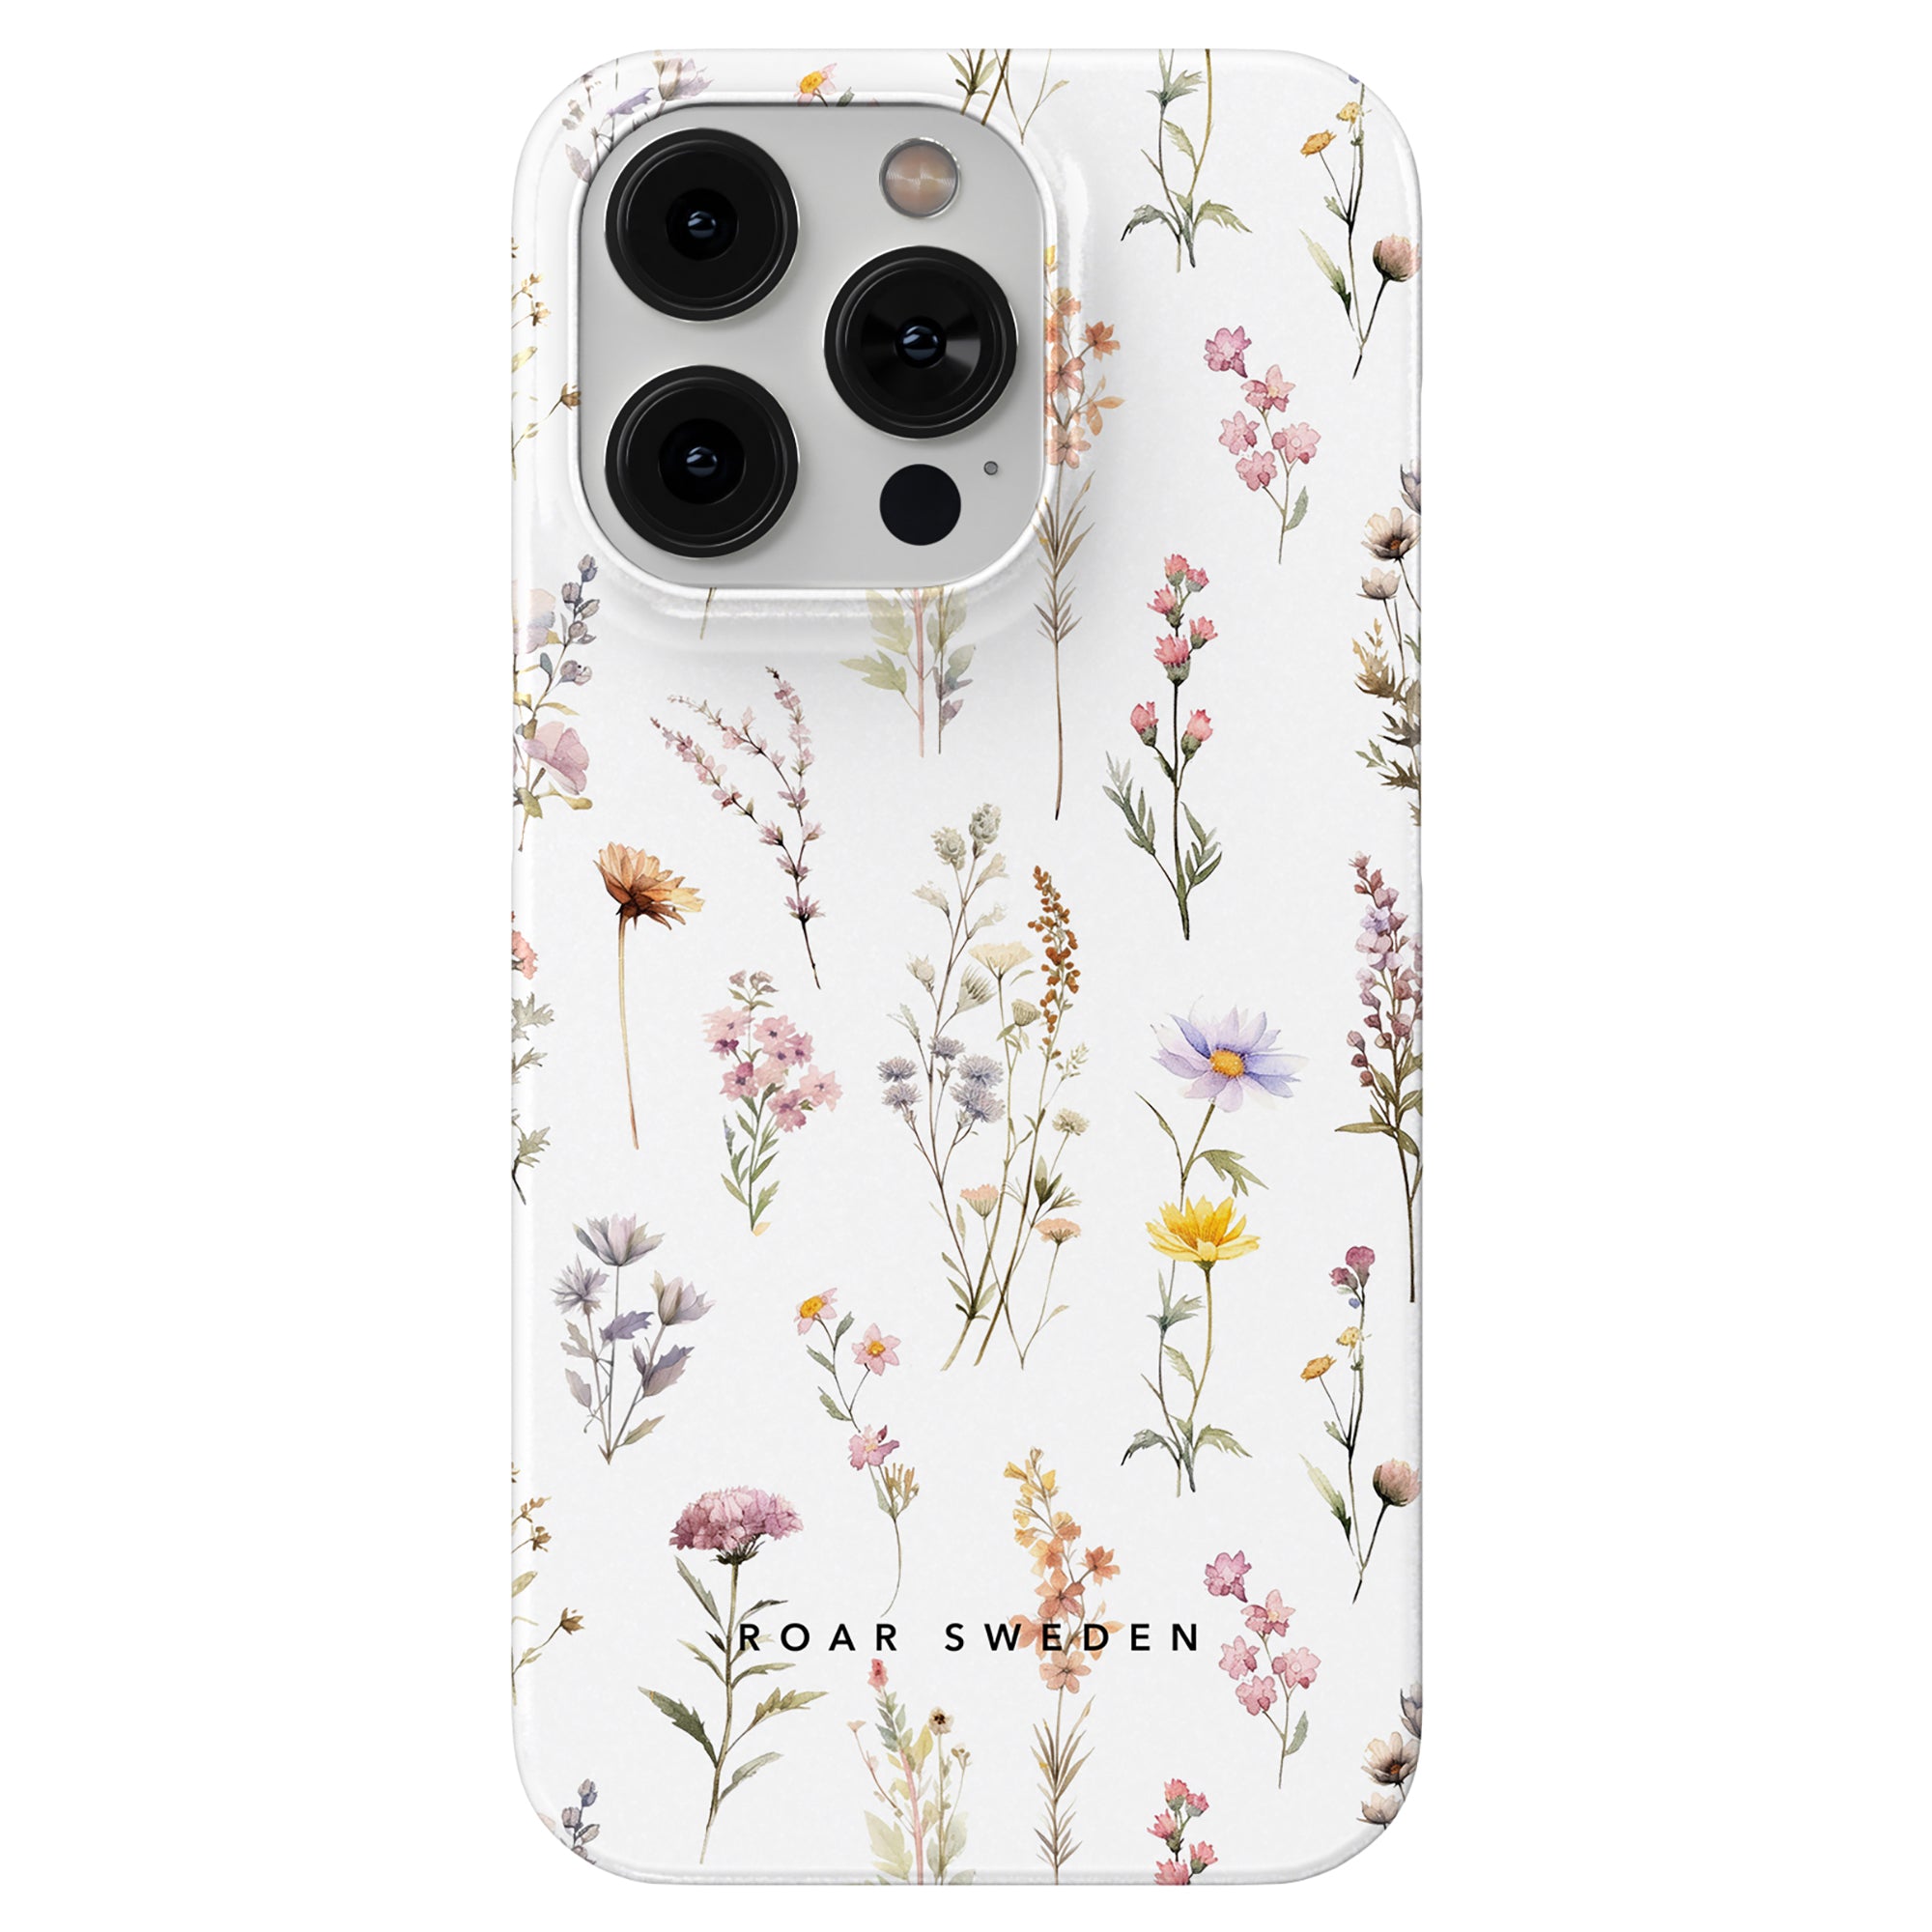 Wild Flowers - Slim case, sturdy smartphone case with camera cutouts and lightweight design.